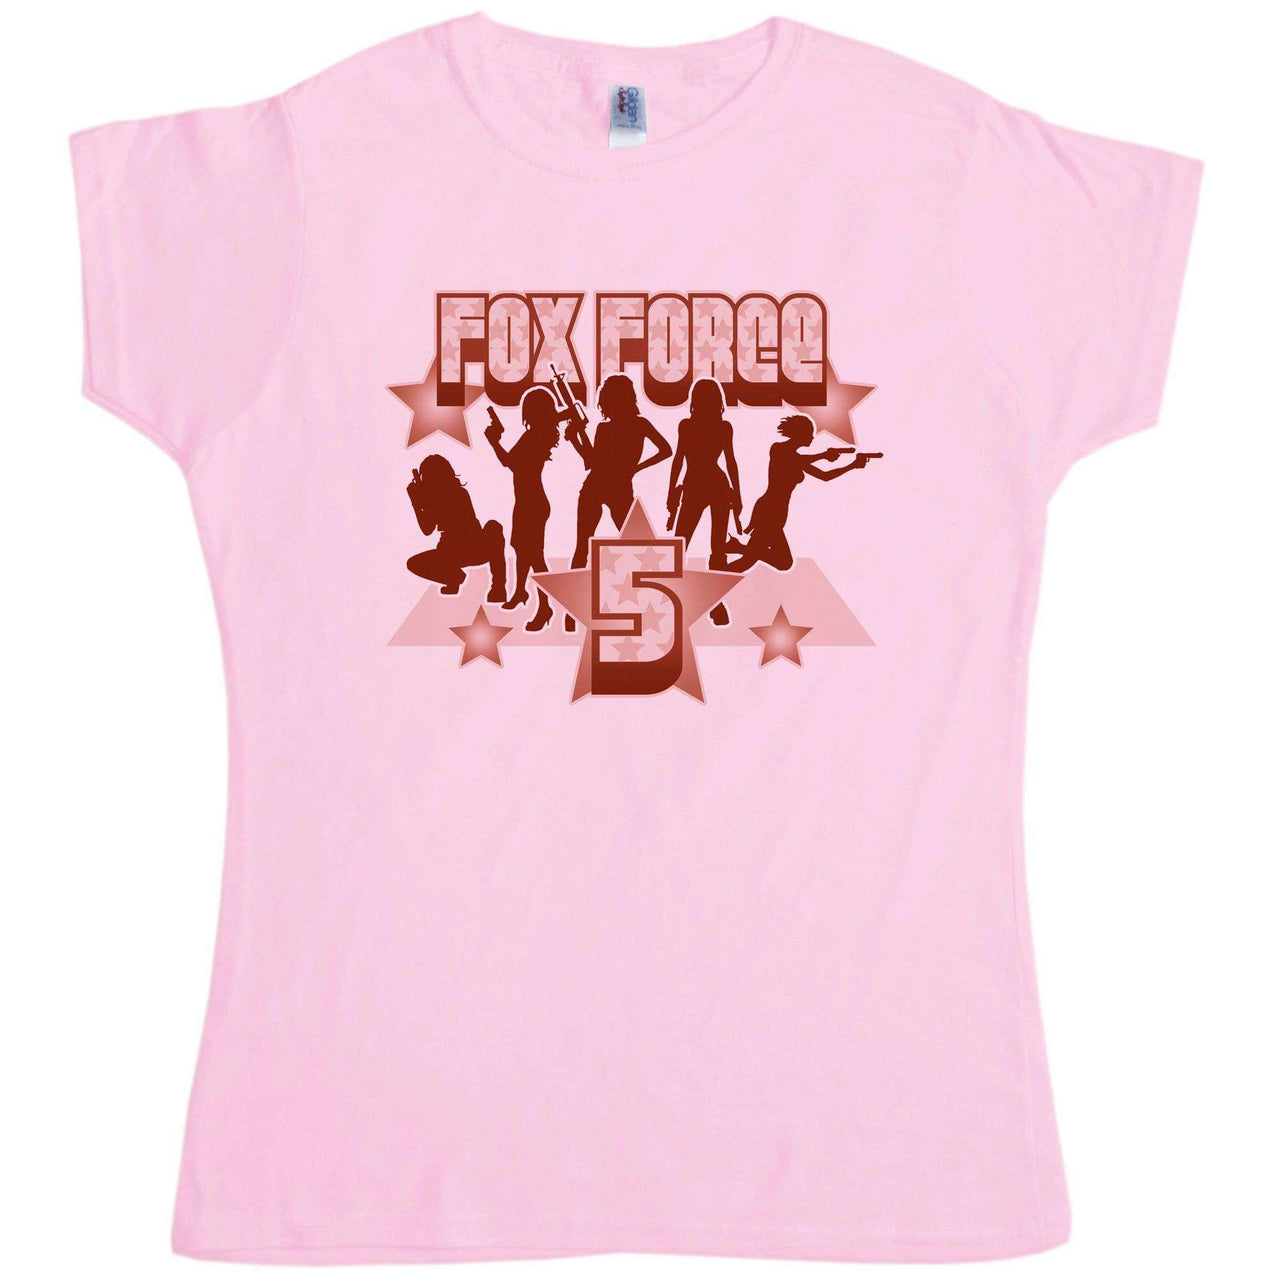 Fox Force Five Womens Fitted T-Shirt 8Ball